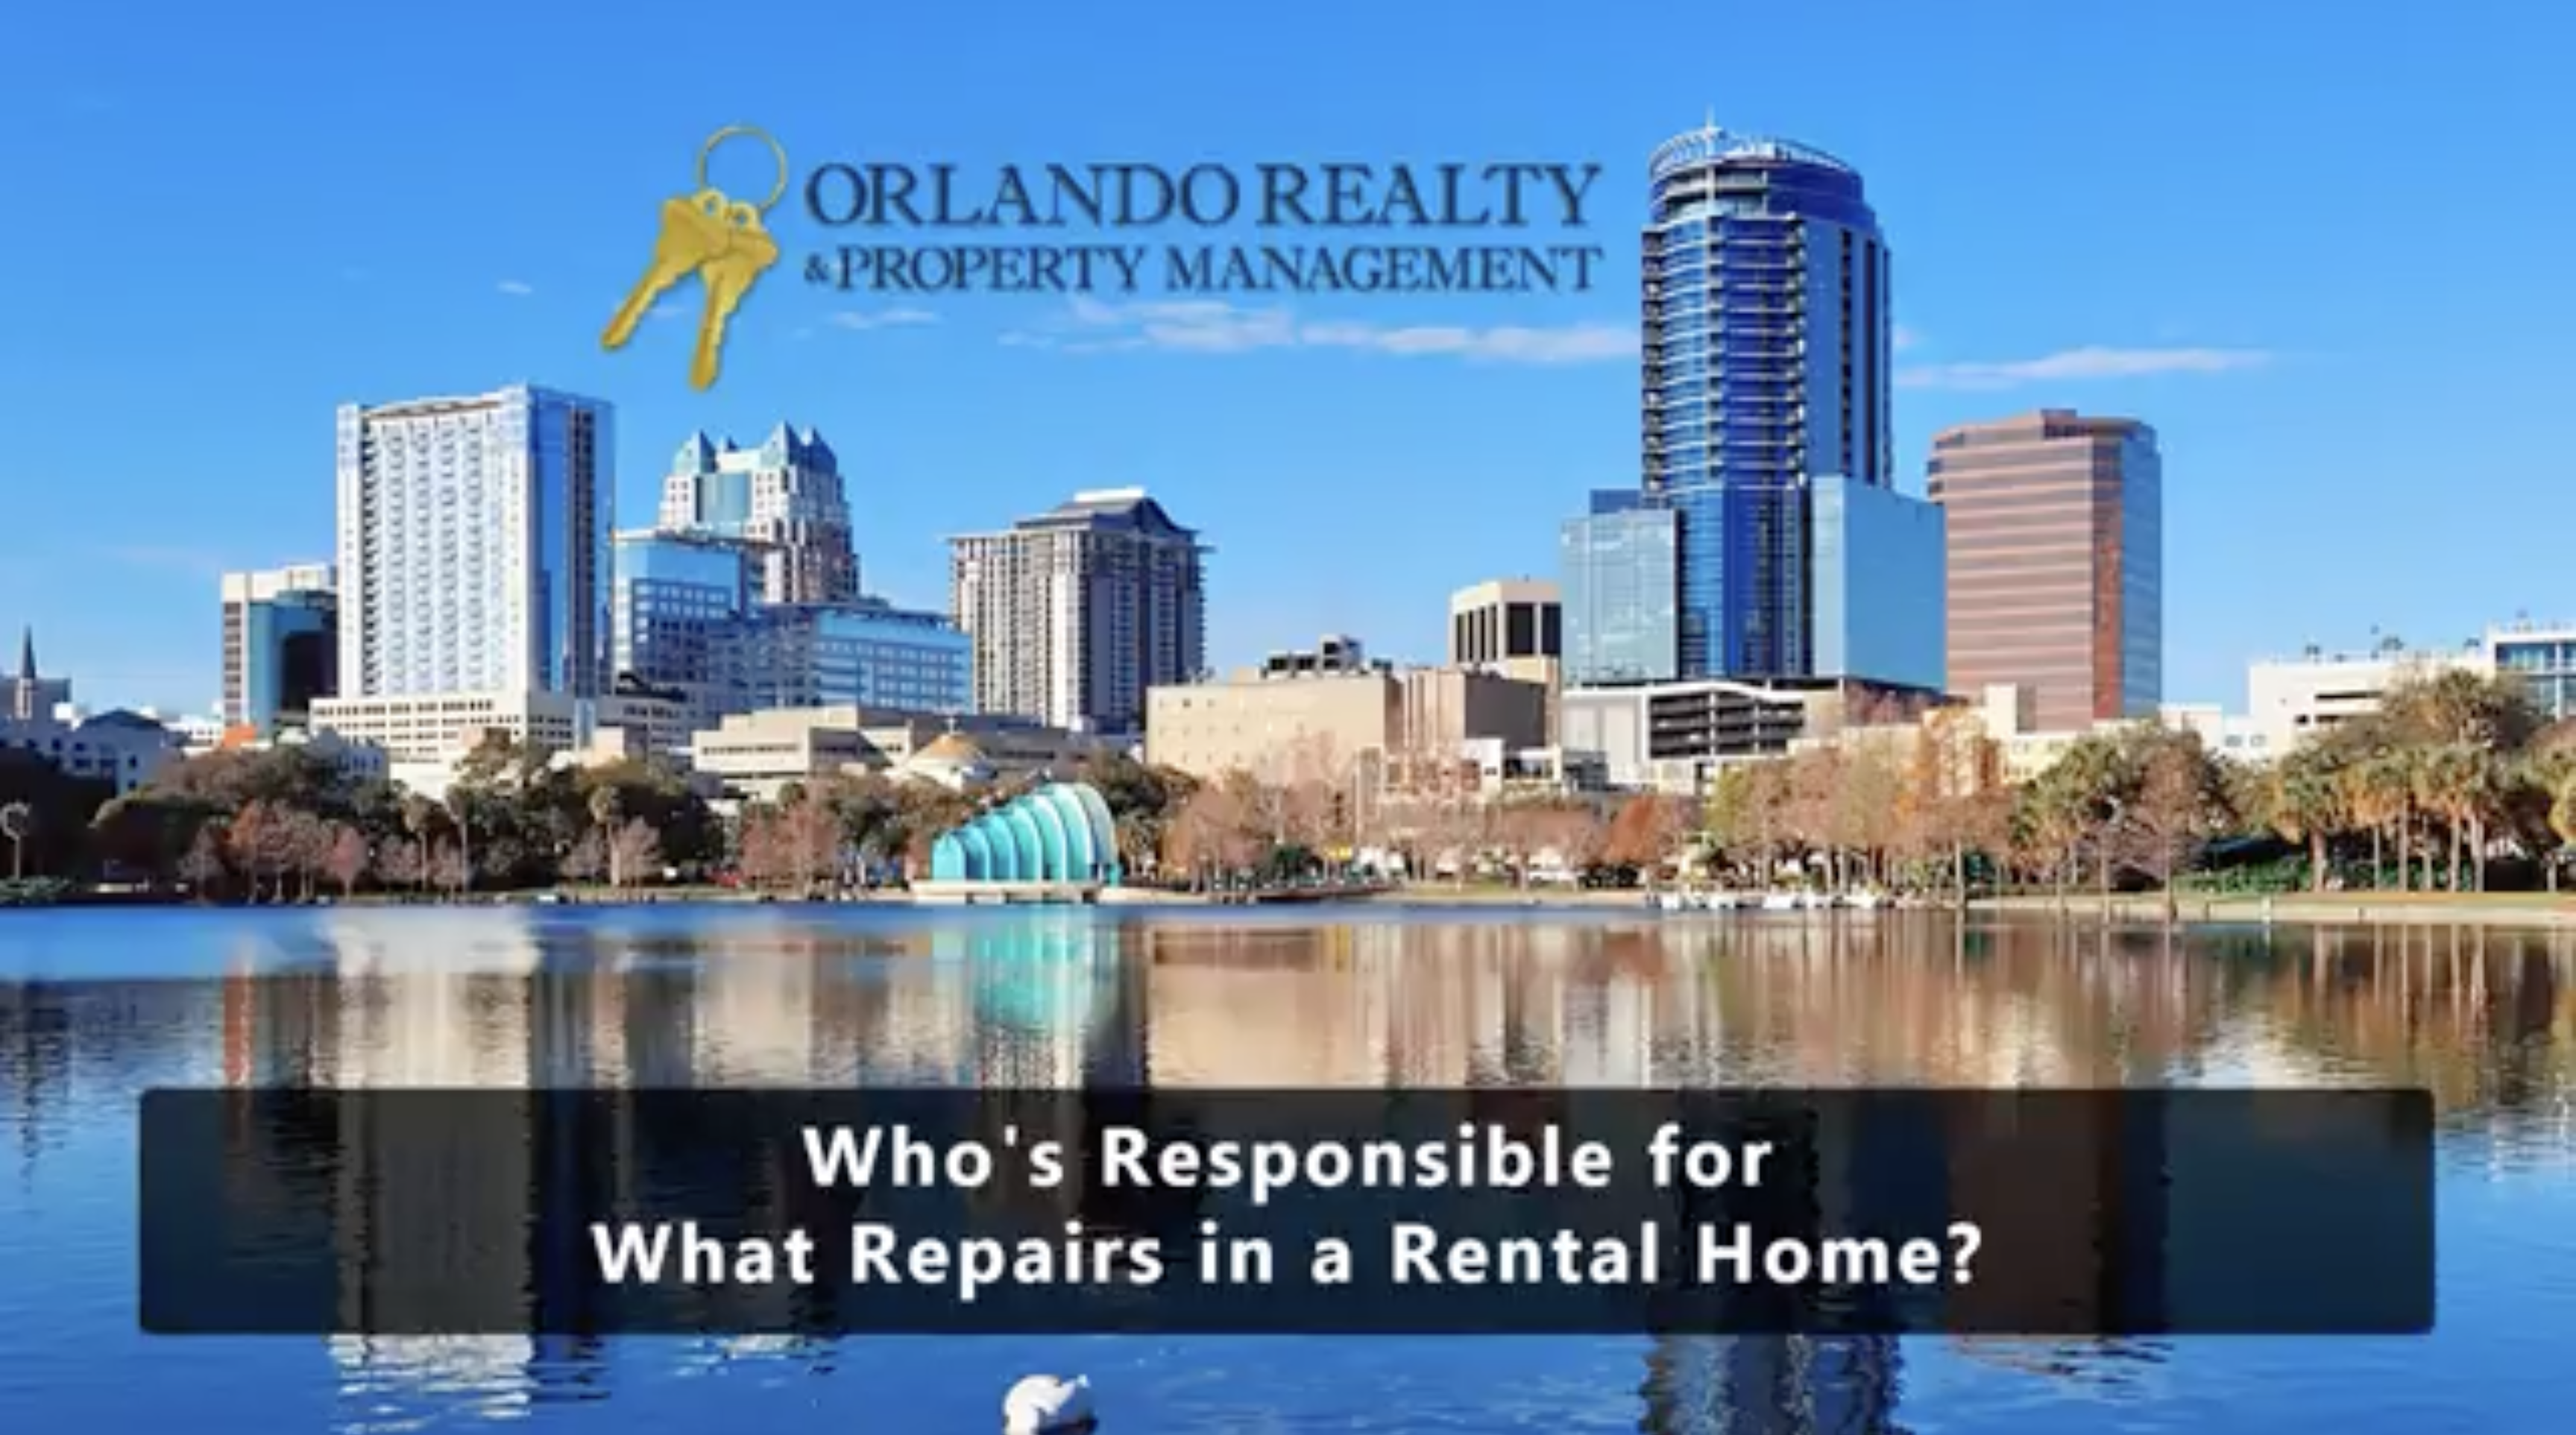 Who’s Responsible for What Repairs in an Orlando Rental Home?